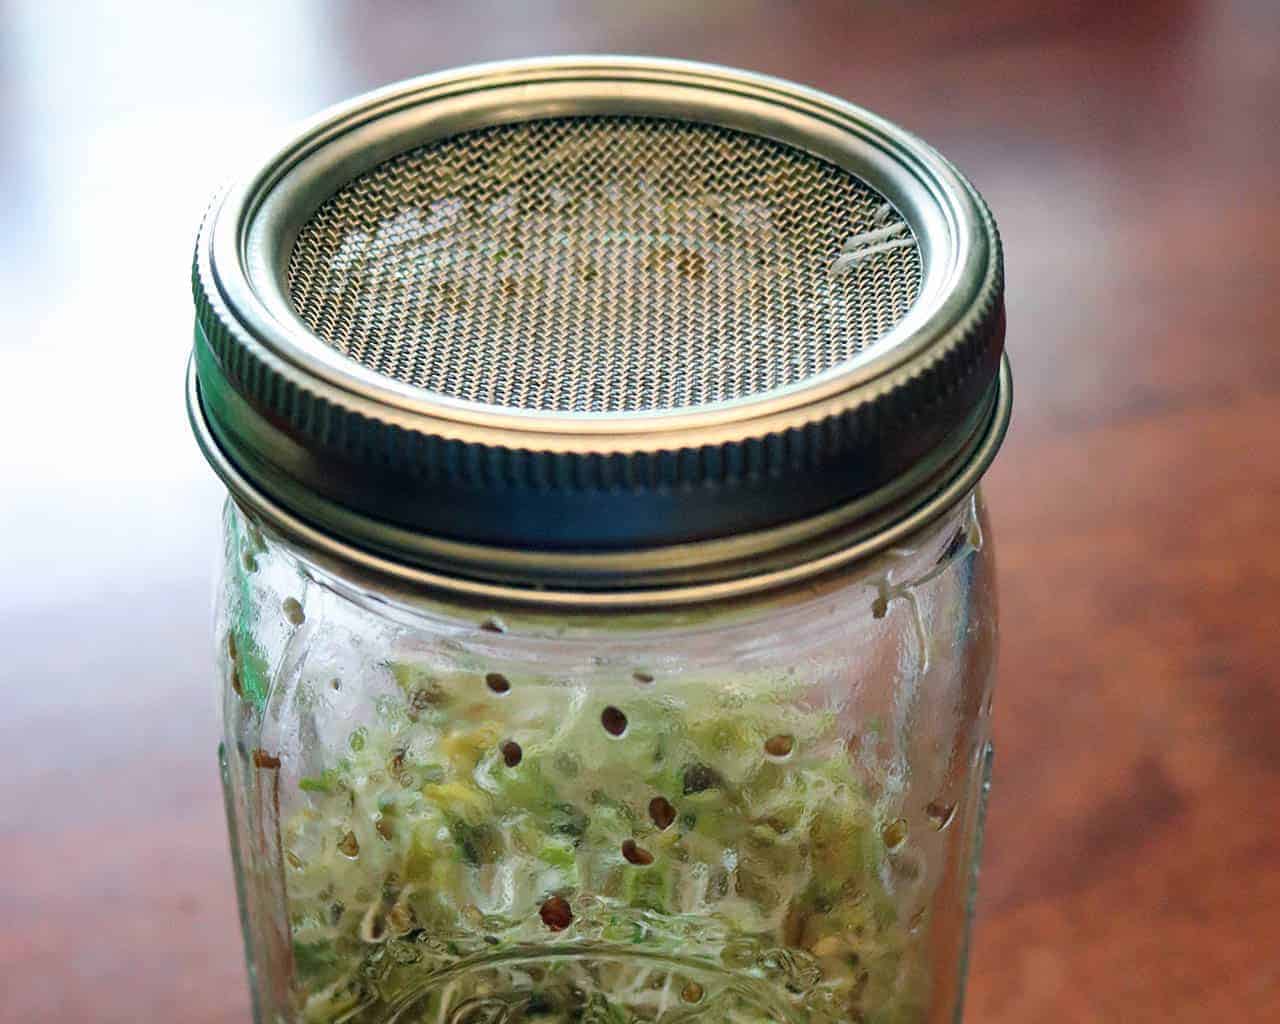 stainless-steel-mesh-sprouting-lid-band-growing-sprouts-wide-mouth-quart-mason-jar-closeup